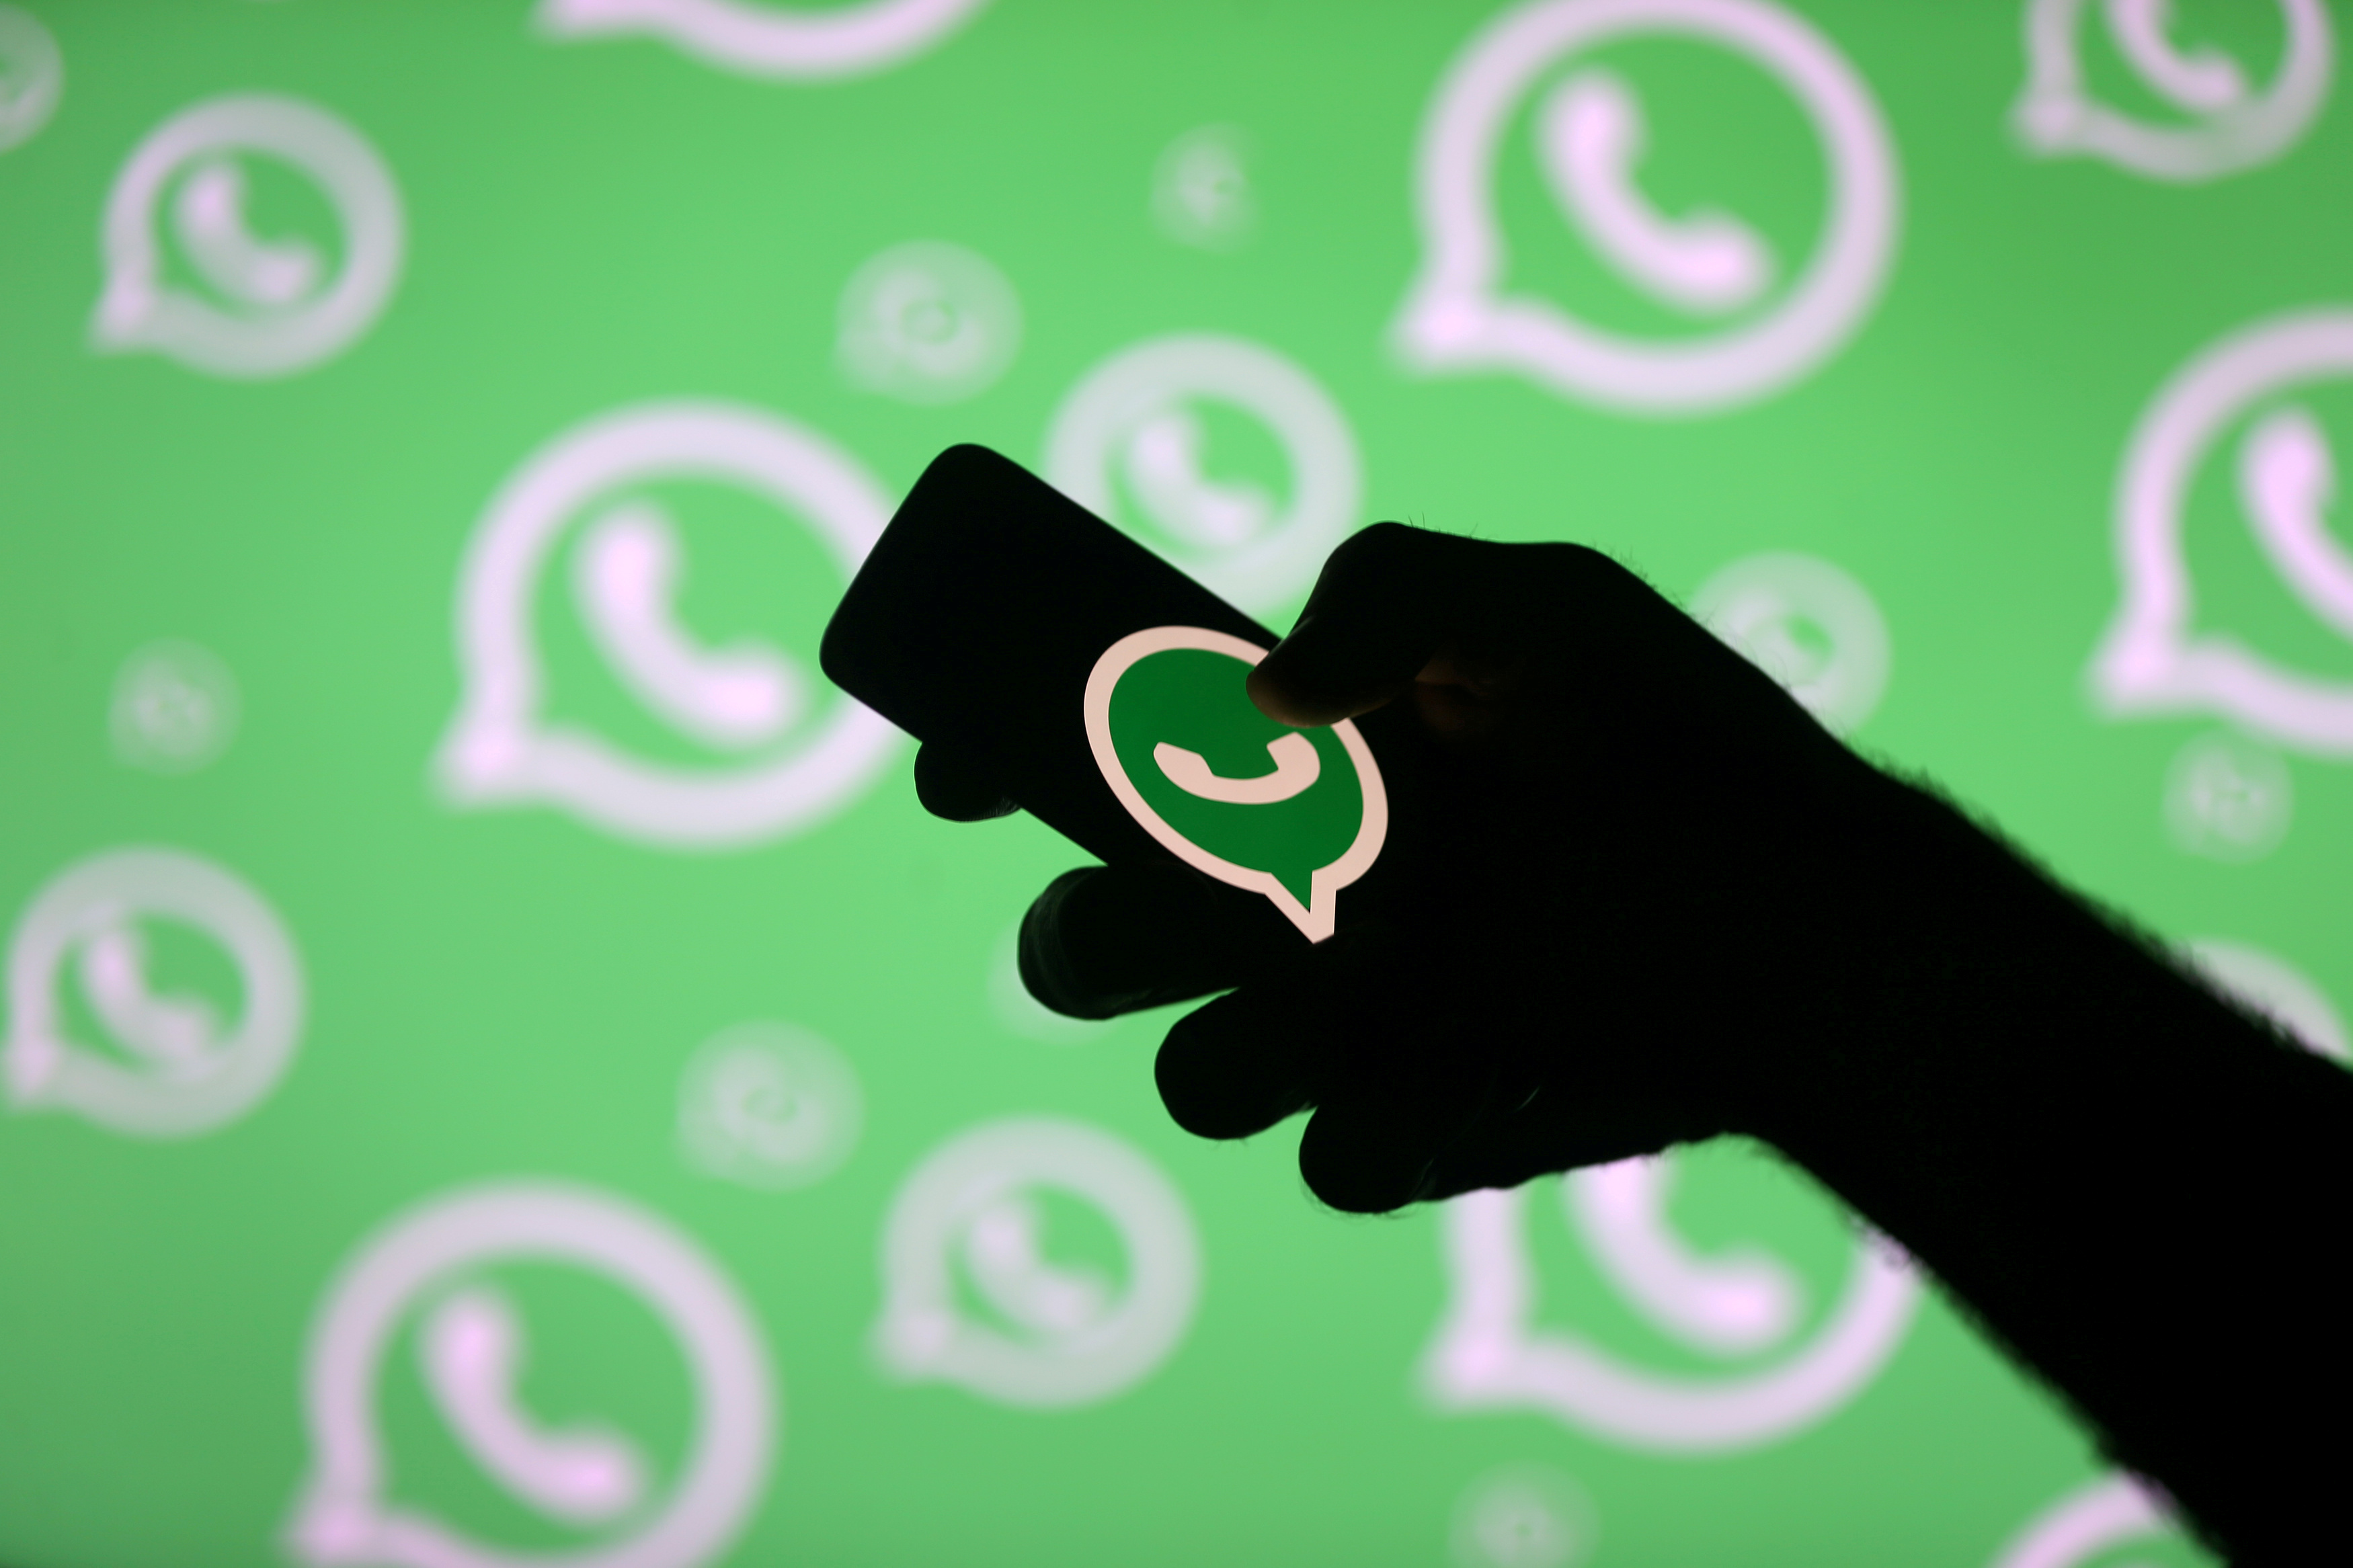 A man uses the WhatsApp app on his mobile (Photo: REUTERS/Dado Ruvic/File Photo)